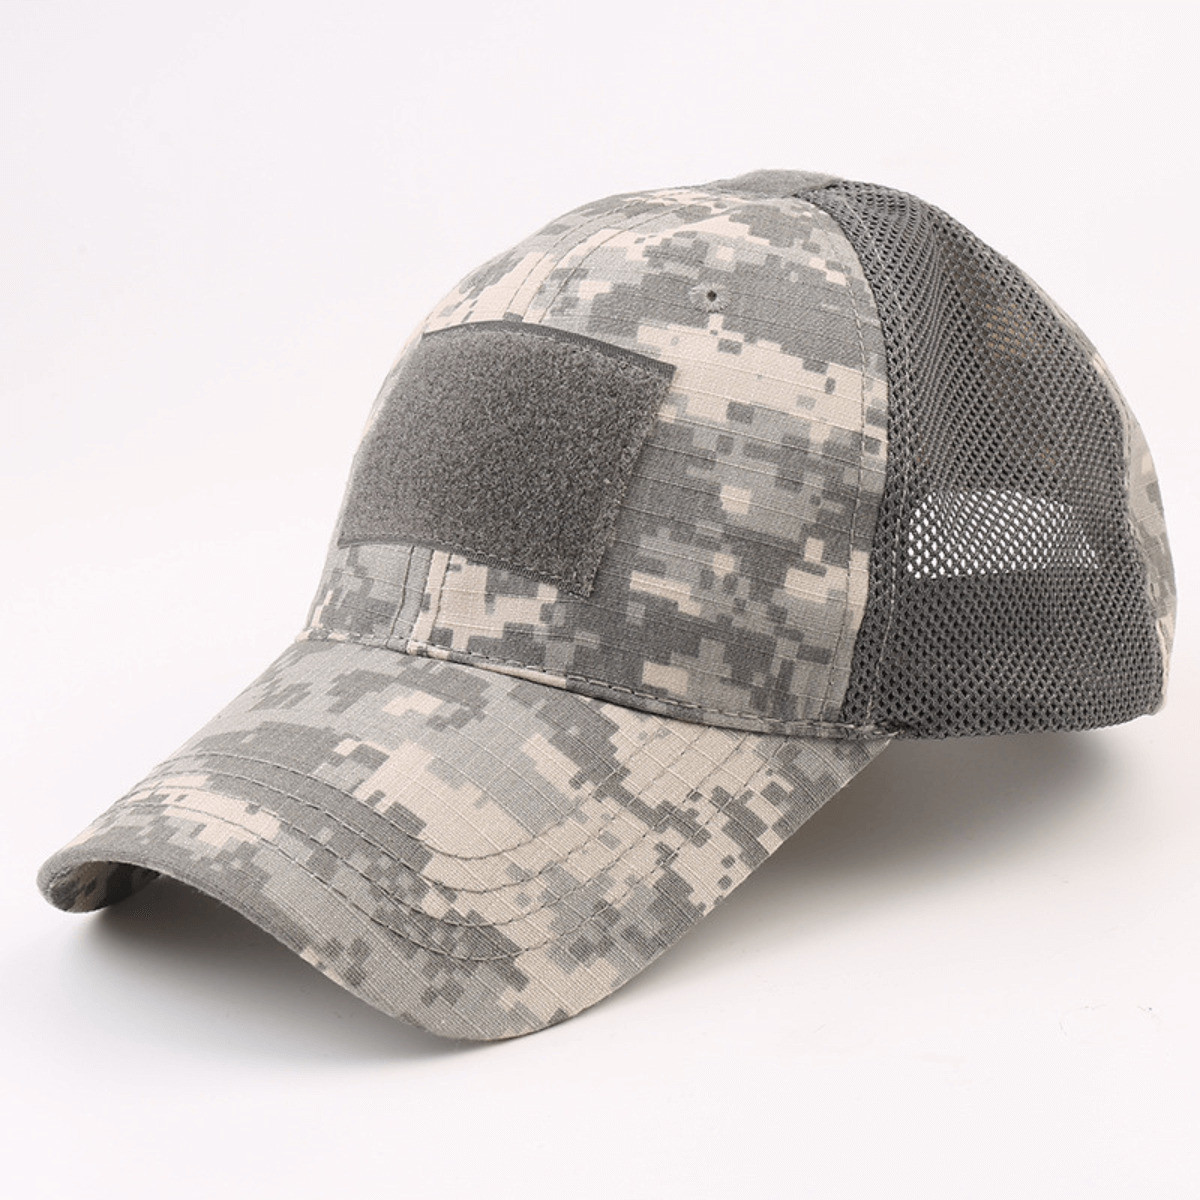 Tactical-Style Patch Hat With Adjustable Strap - BDU Camo